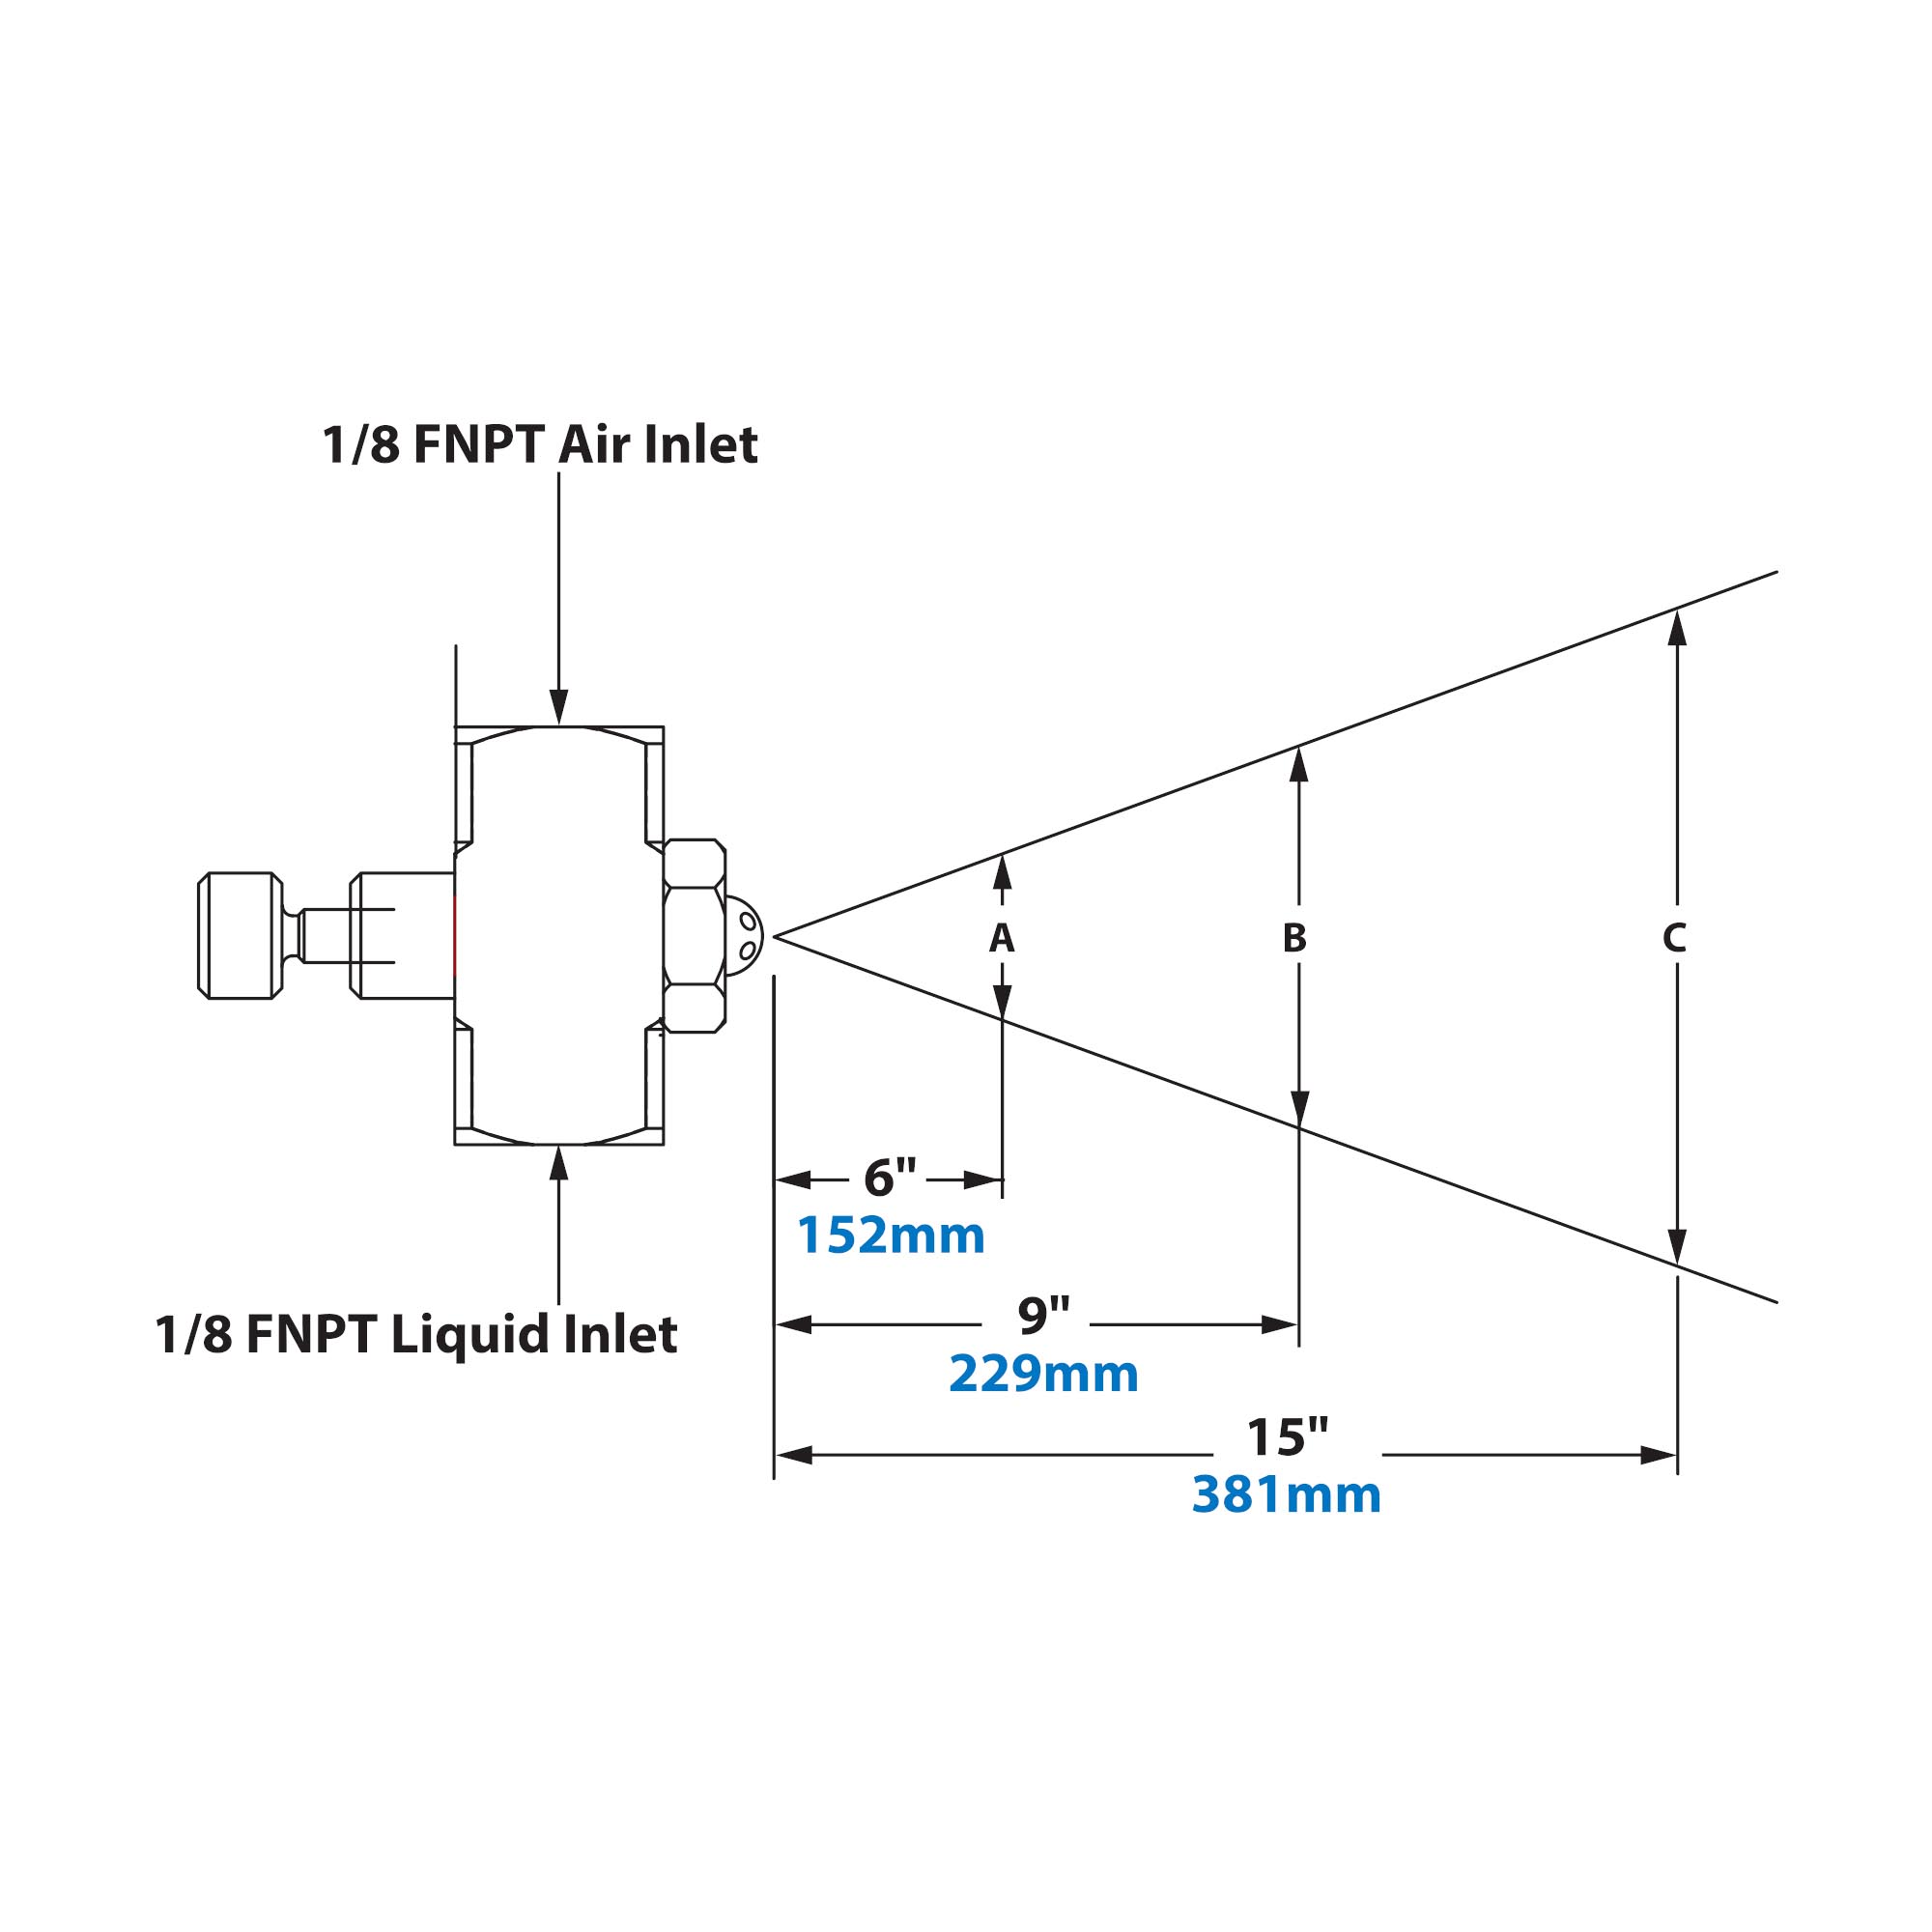 Spray Dimensions - 1/8 FNPT Internal Mix Wide Angle Round Pattern Atomizing Nozzle 